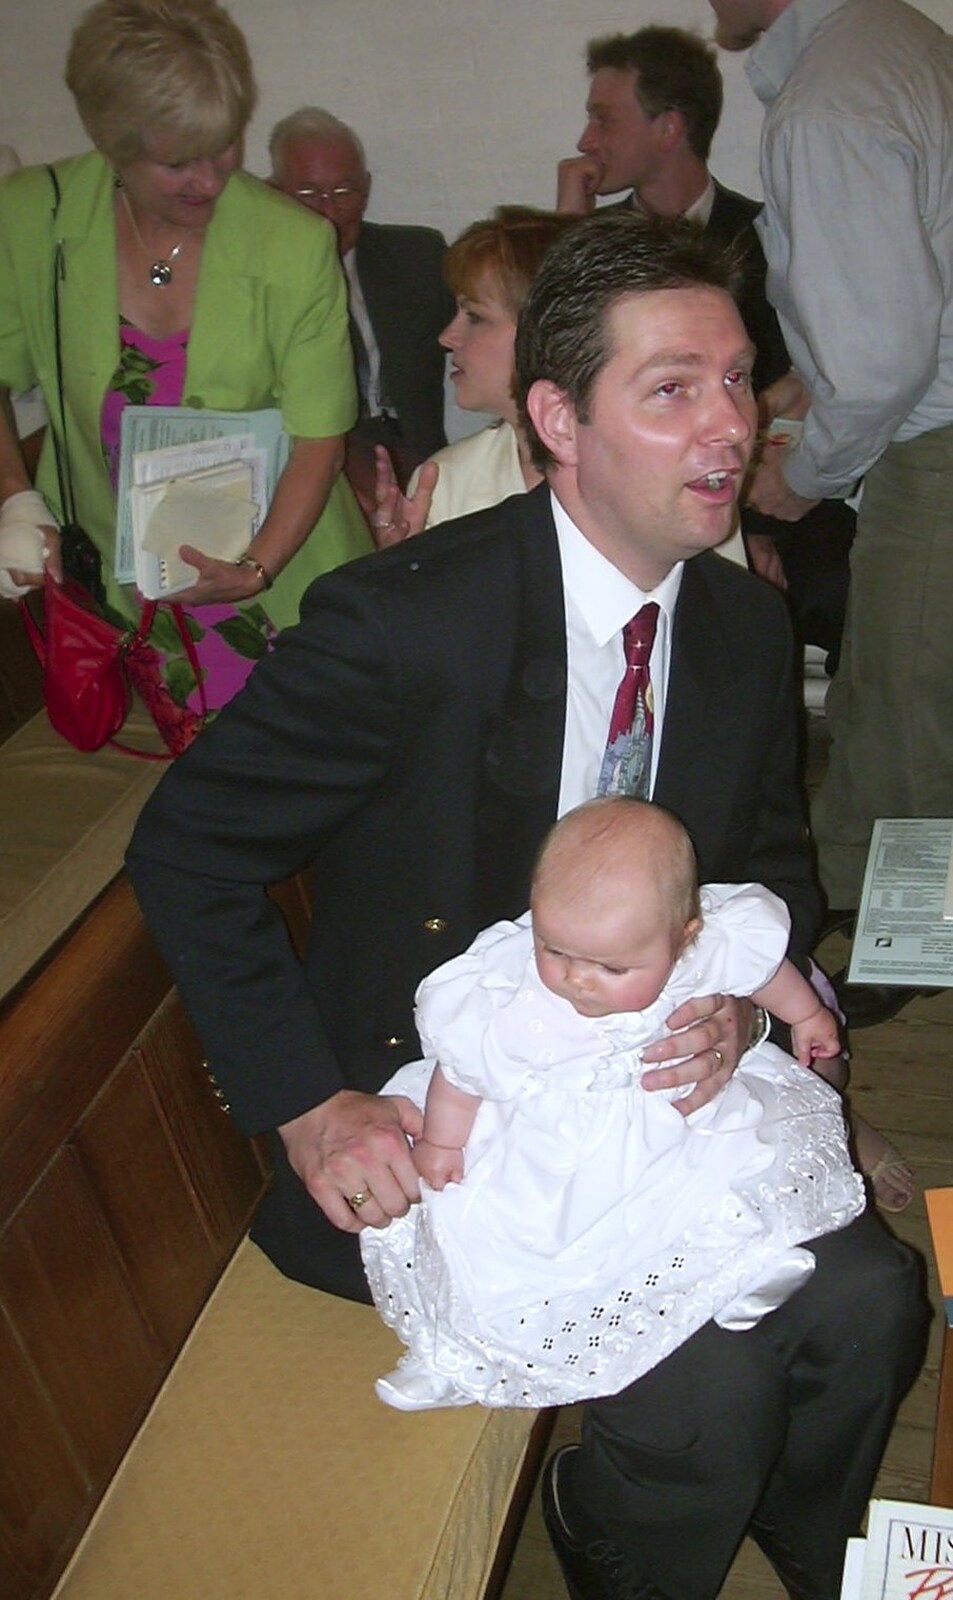 Sean with the baby Sydney from Sydney's Christening, Hordle, Hampshire - 4th May 2002